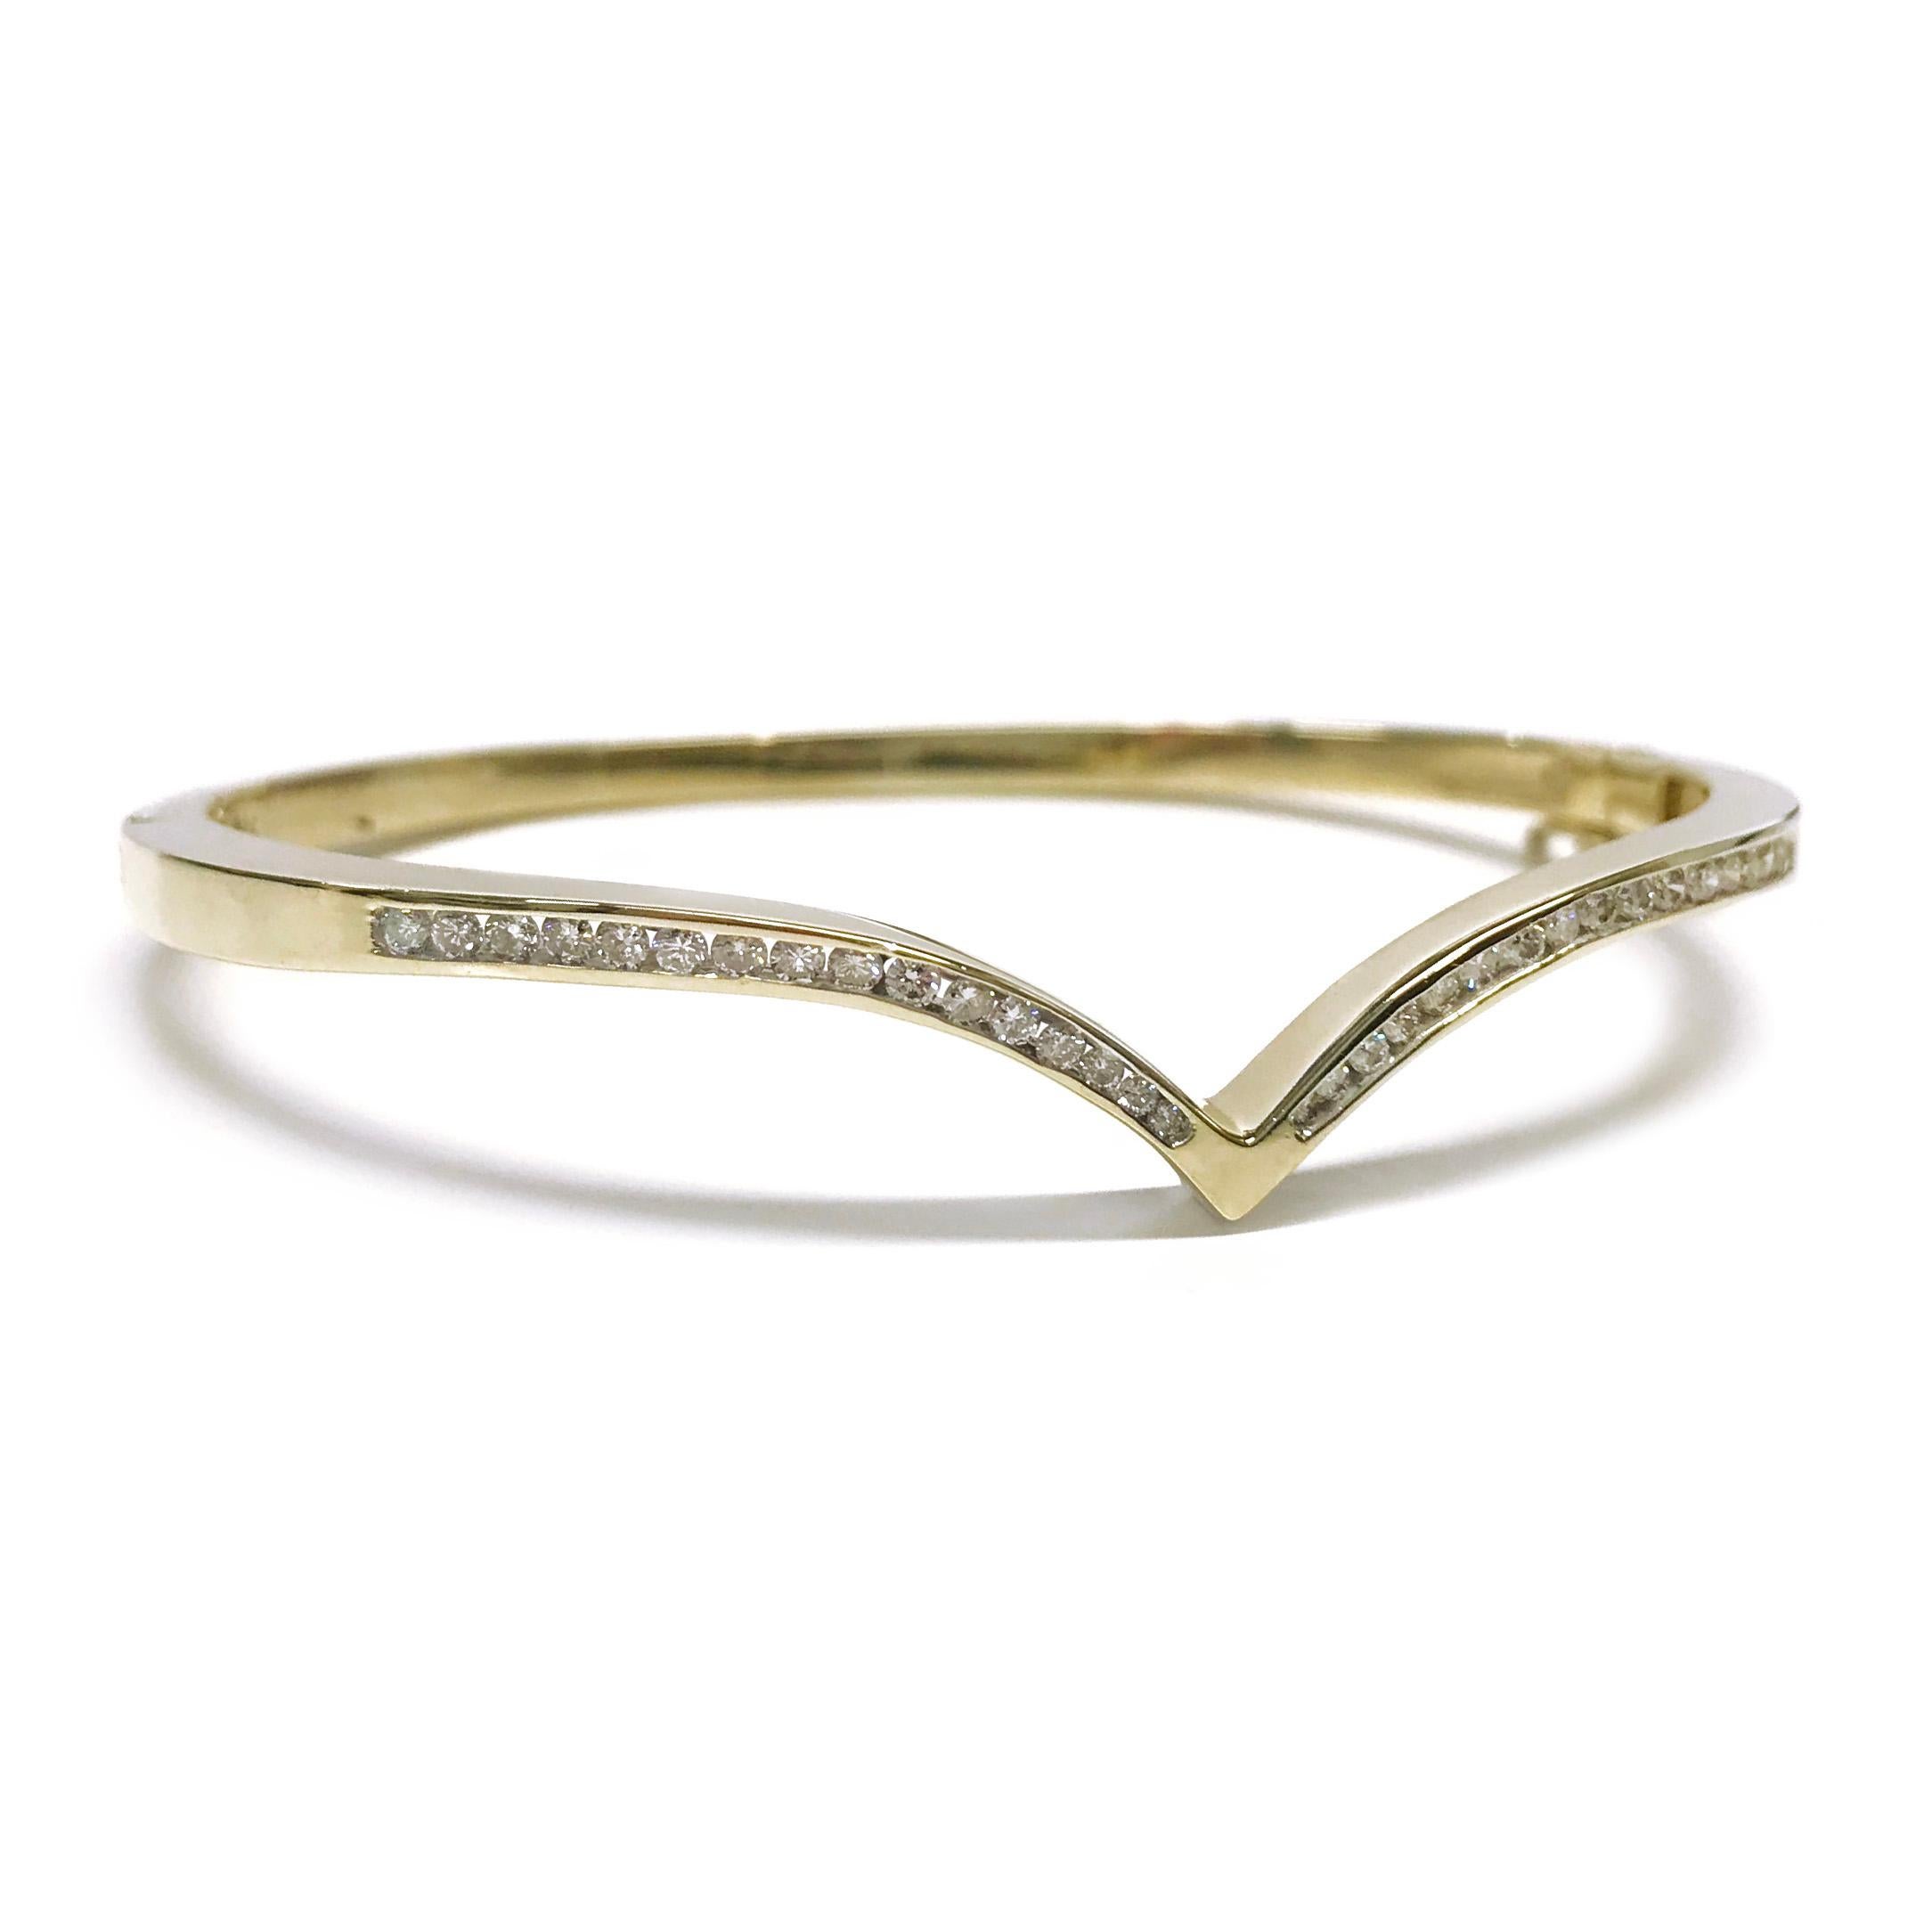 14 Karat Curved Channel-Set Diamond Hinged Bangle Bracelet. Thirty-two round diamonds are channel-set on the top of this delicately designed hinged bangle bracelet. The sides of the bracelet come together to form a peak at the center. Diamonds are